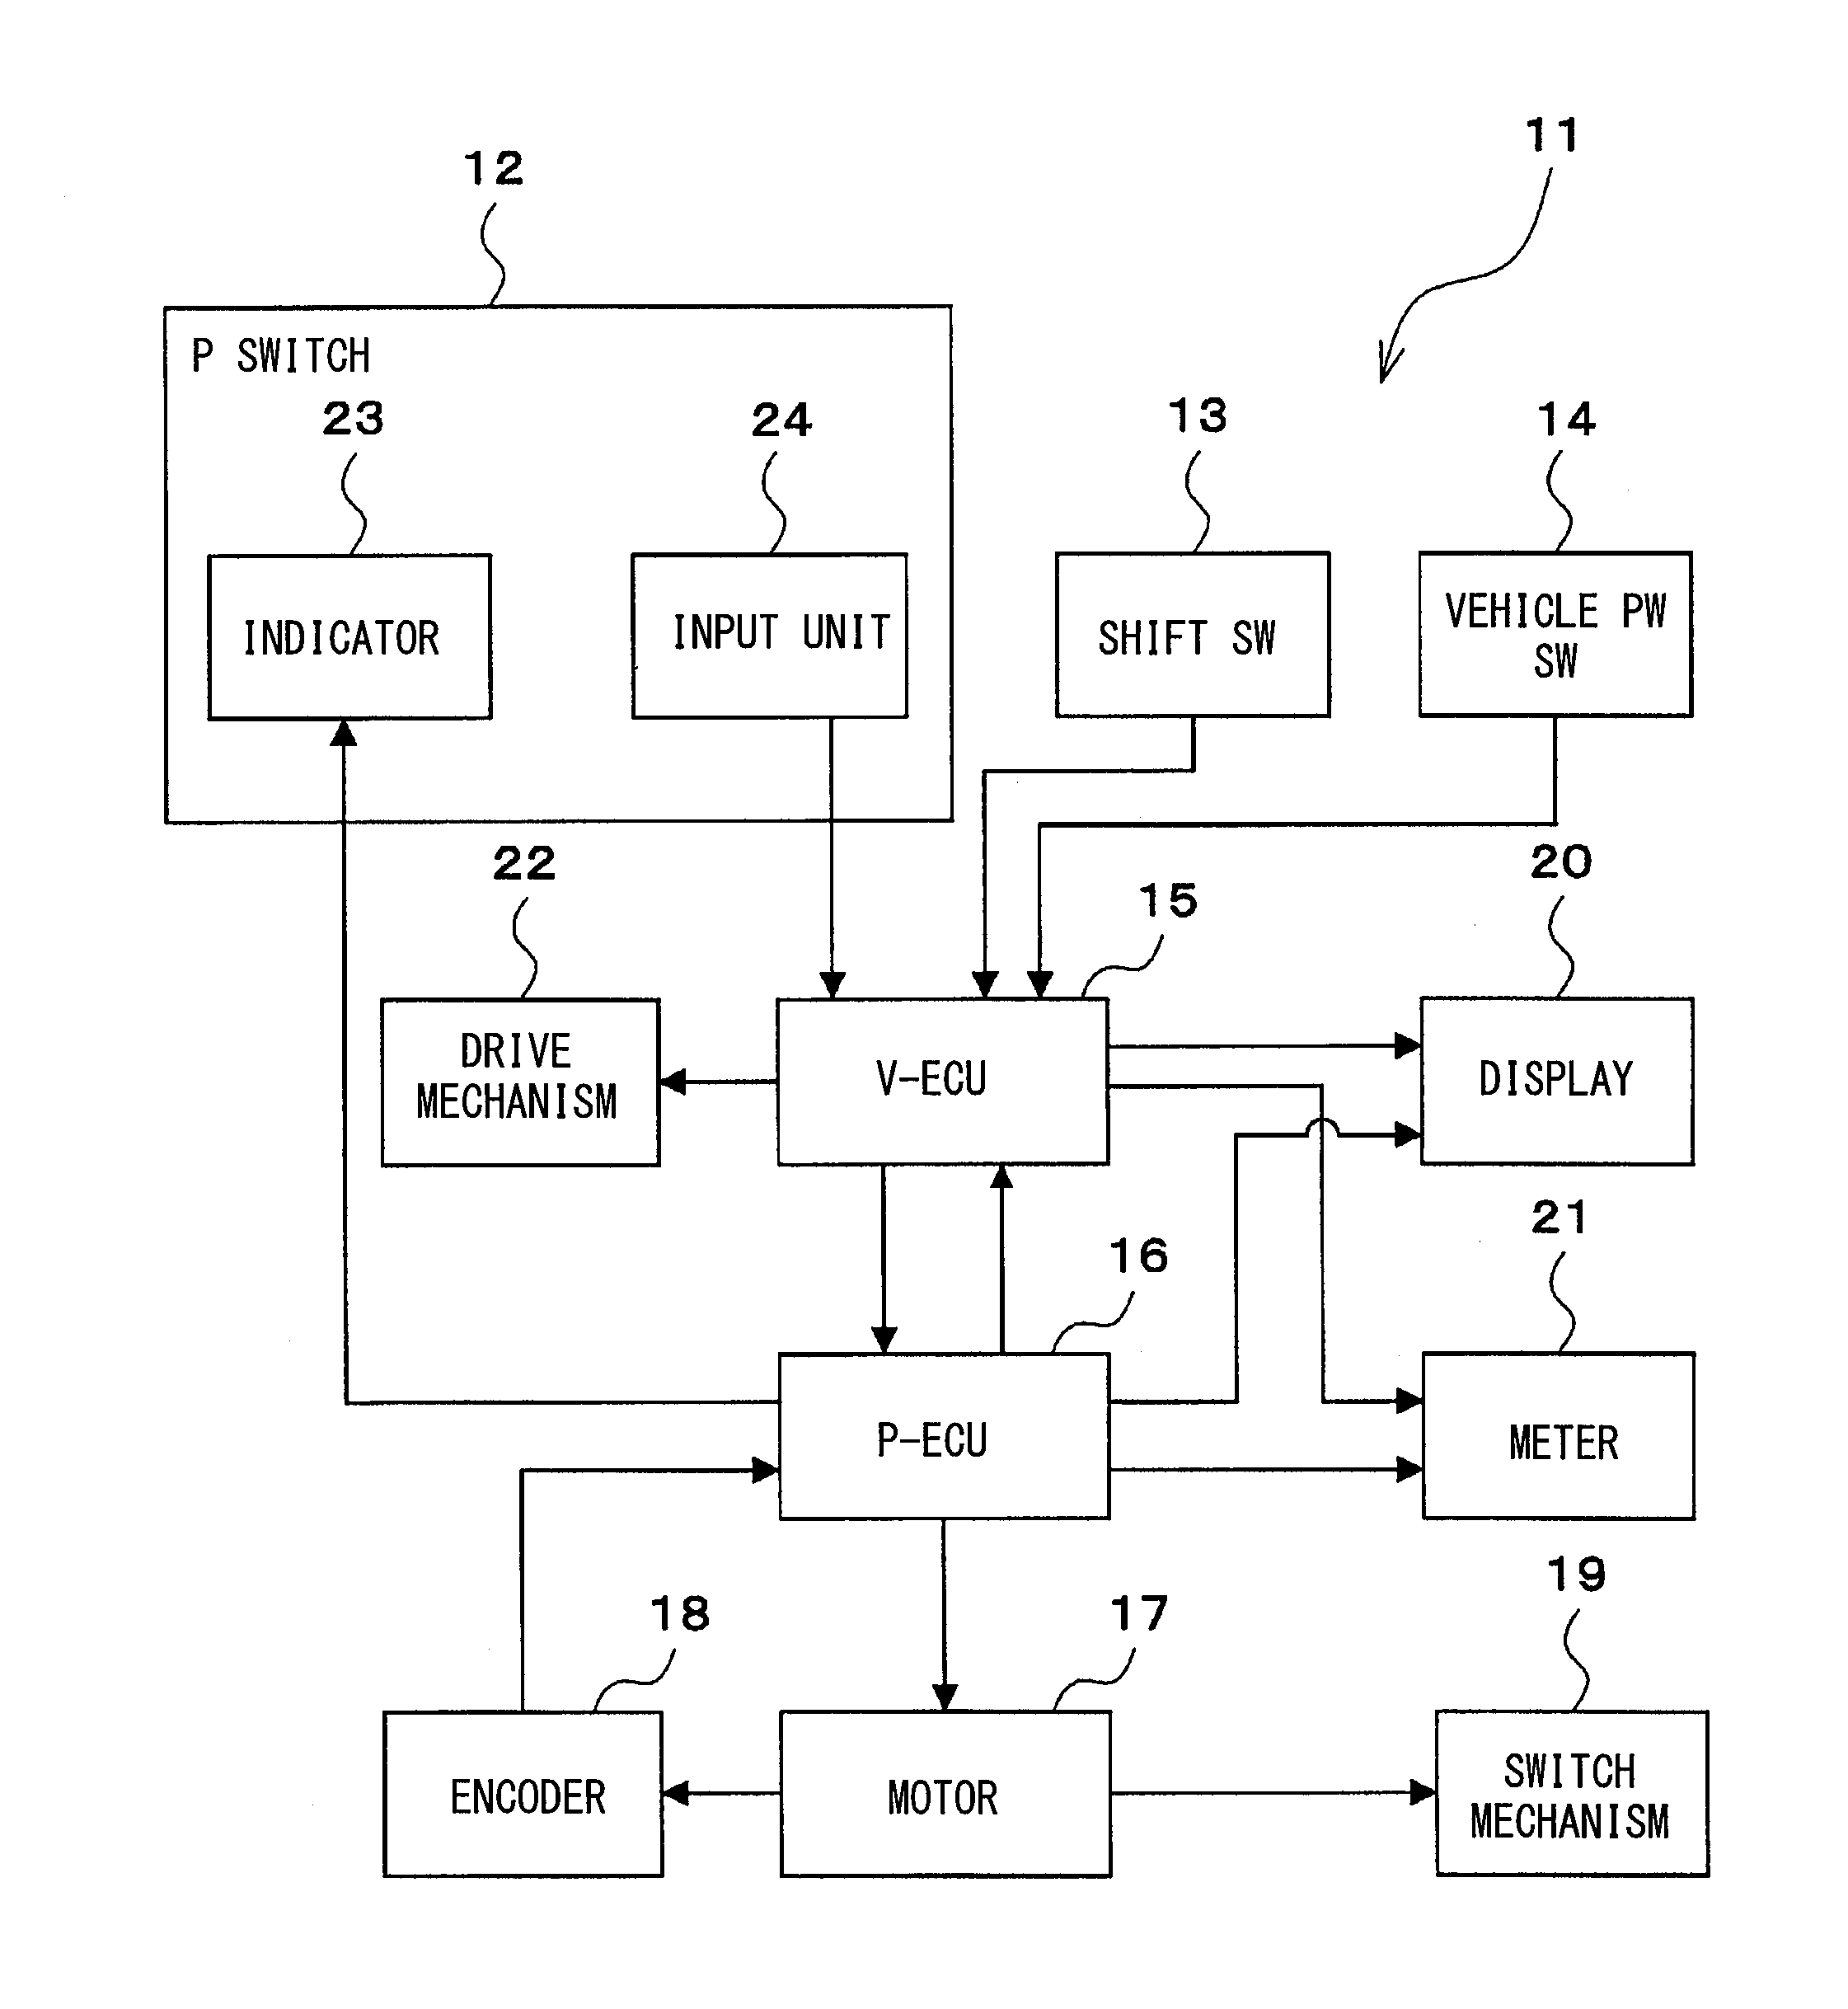 Shift position switching device